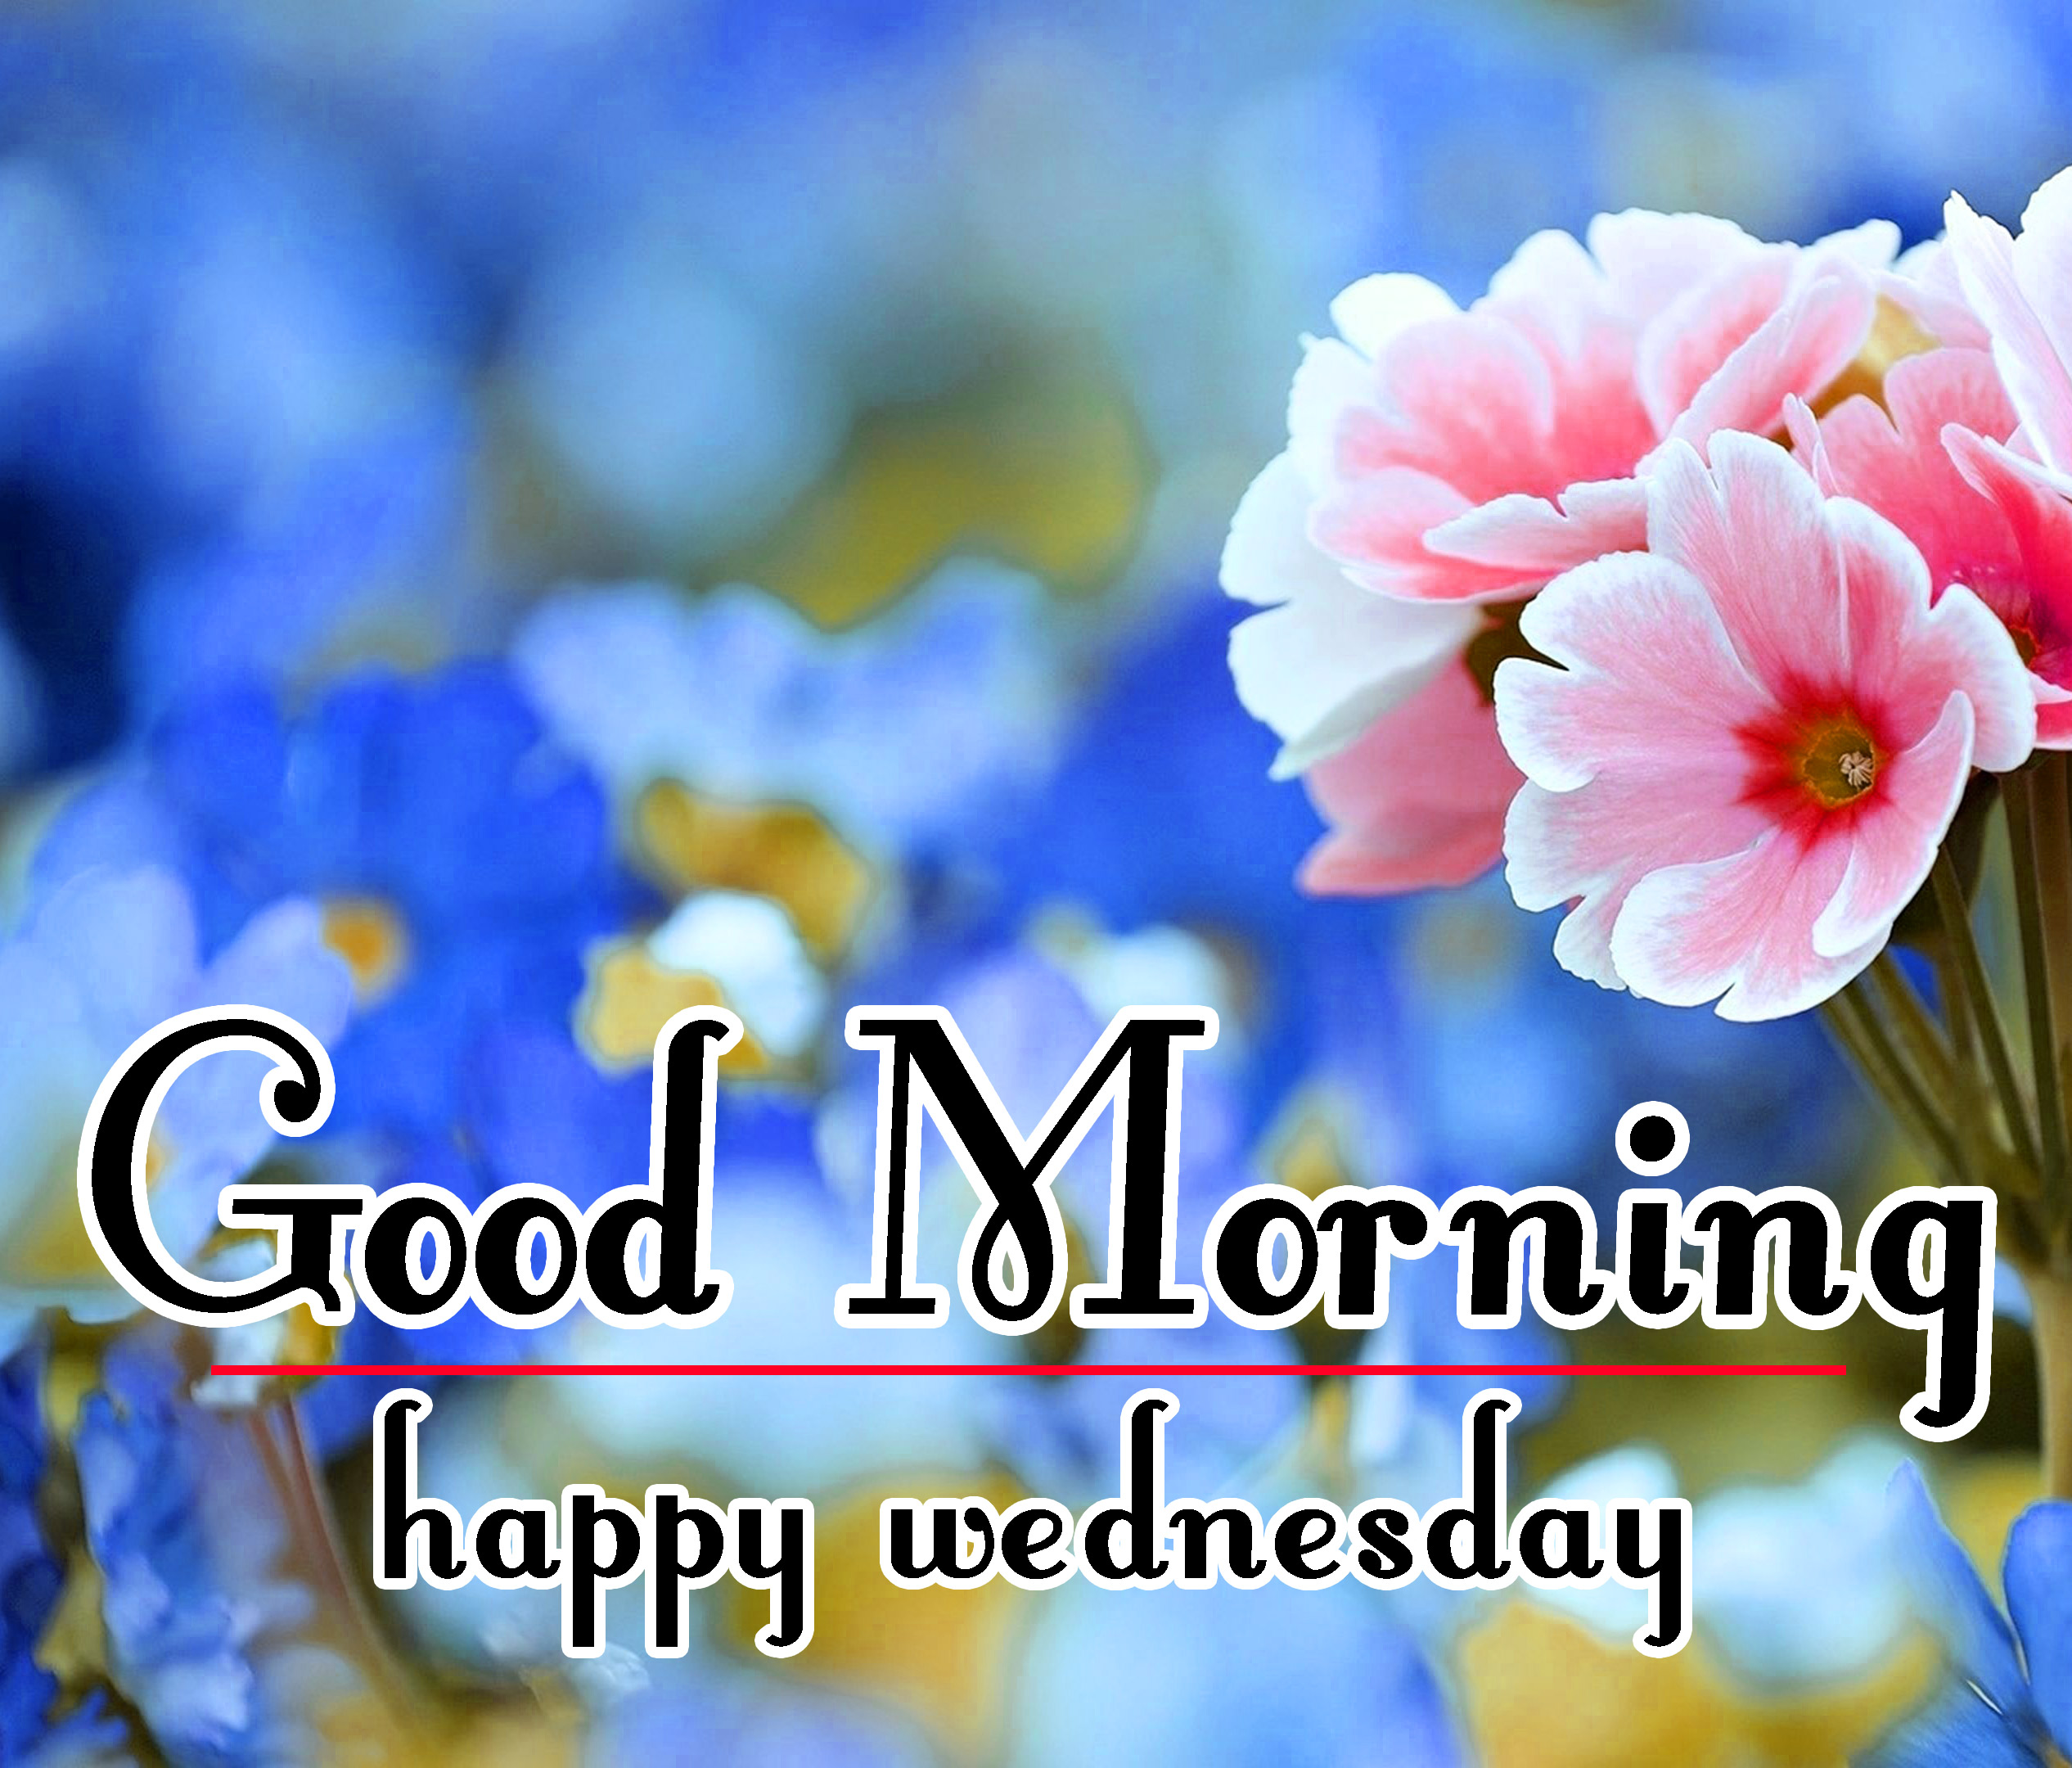 136 Good Morning Wednesday Images For Whatsapp Download Good Morning Images Good Morning Photo Hd Downlaod Good Morning Pics Wallpaper Hd